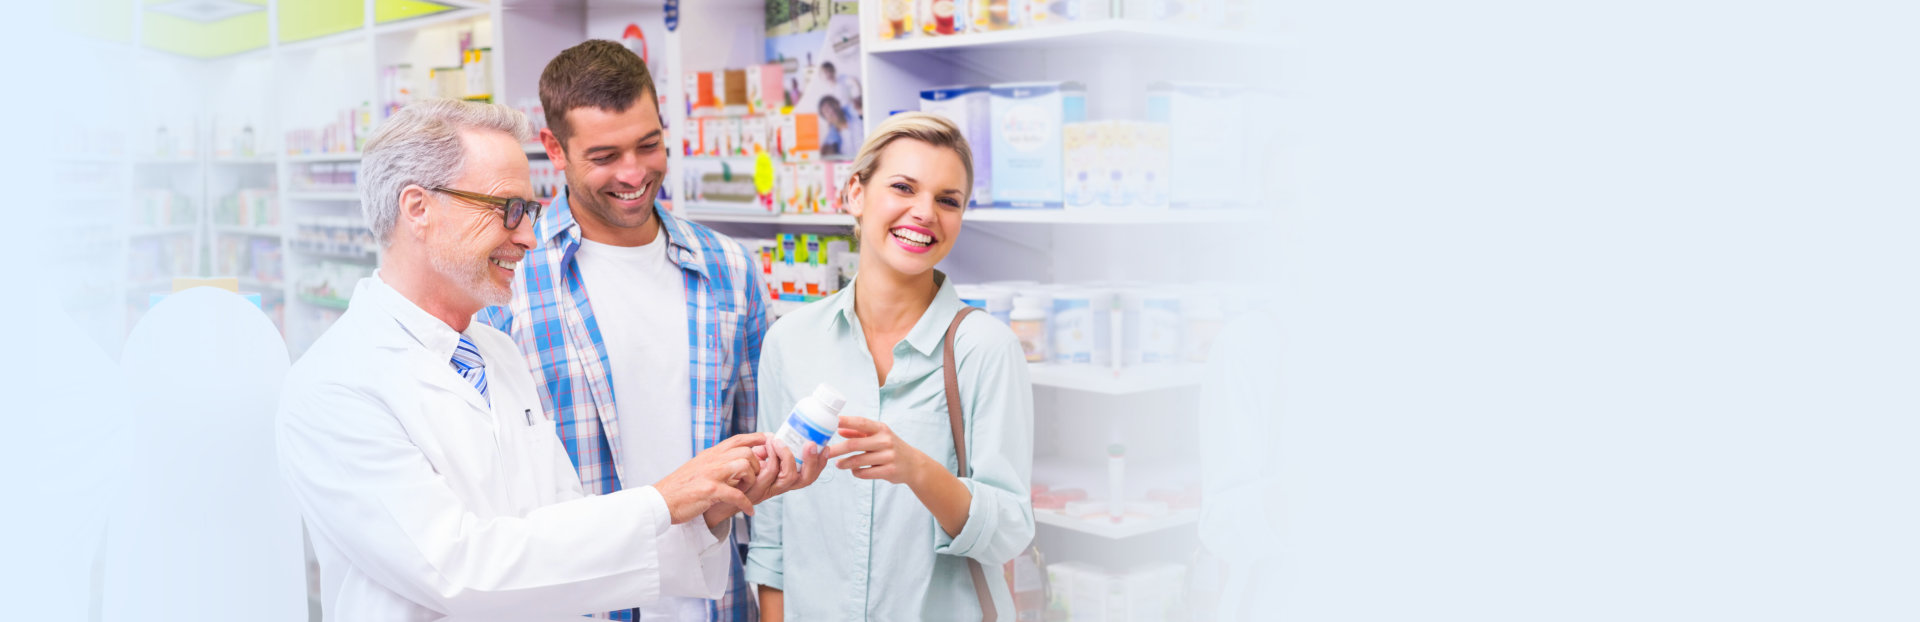 pharmacist and couple laughing